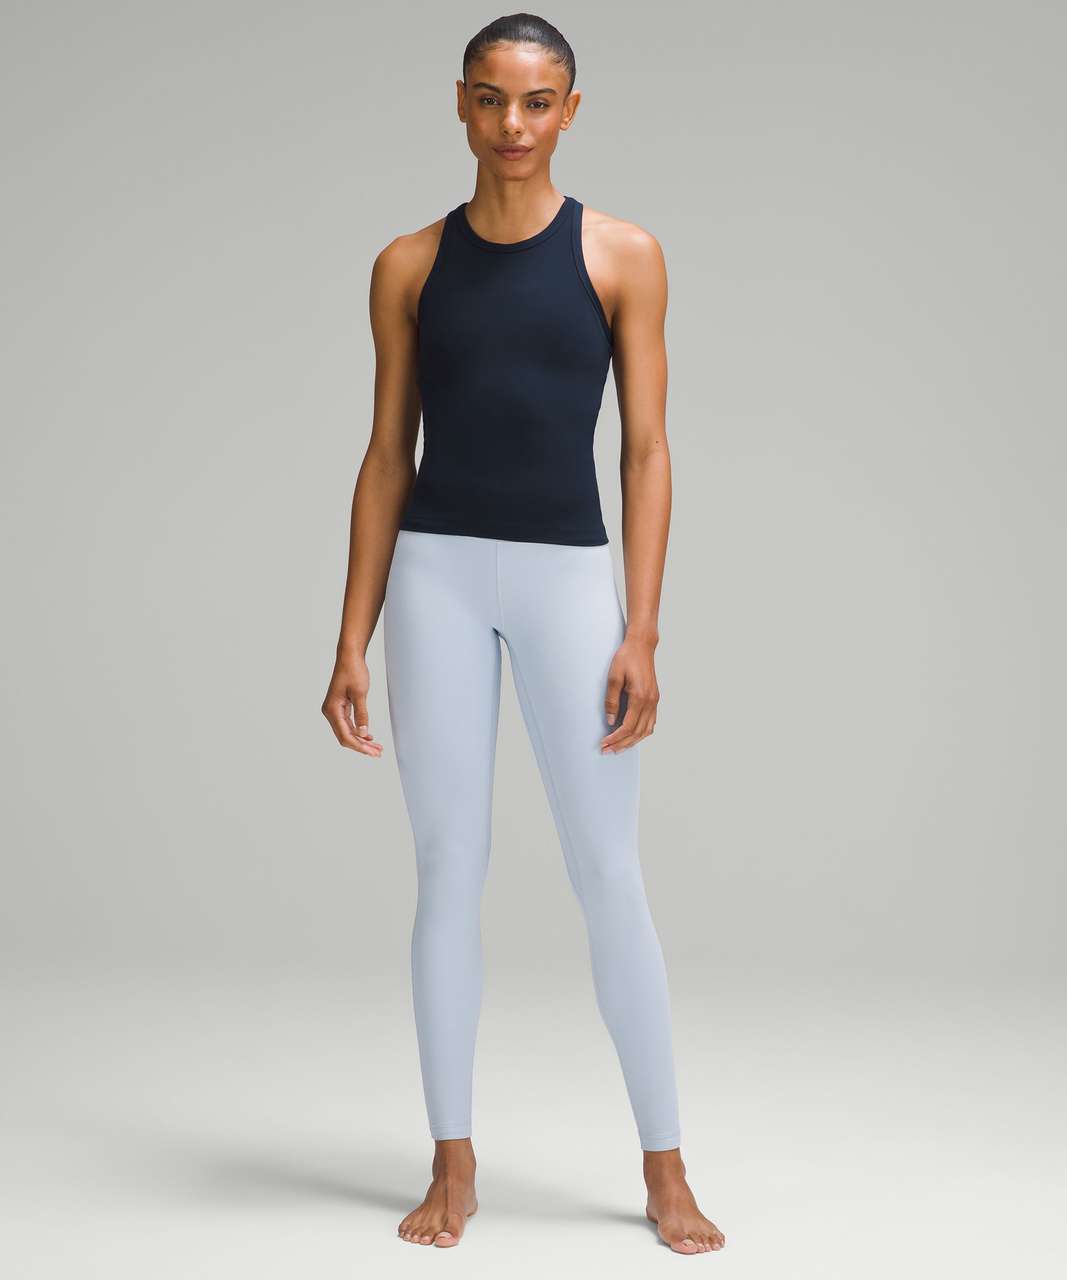 Lululemon Align™ Cropped Tank Top - Size 4 - Contour CNTR - NWT